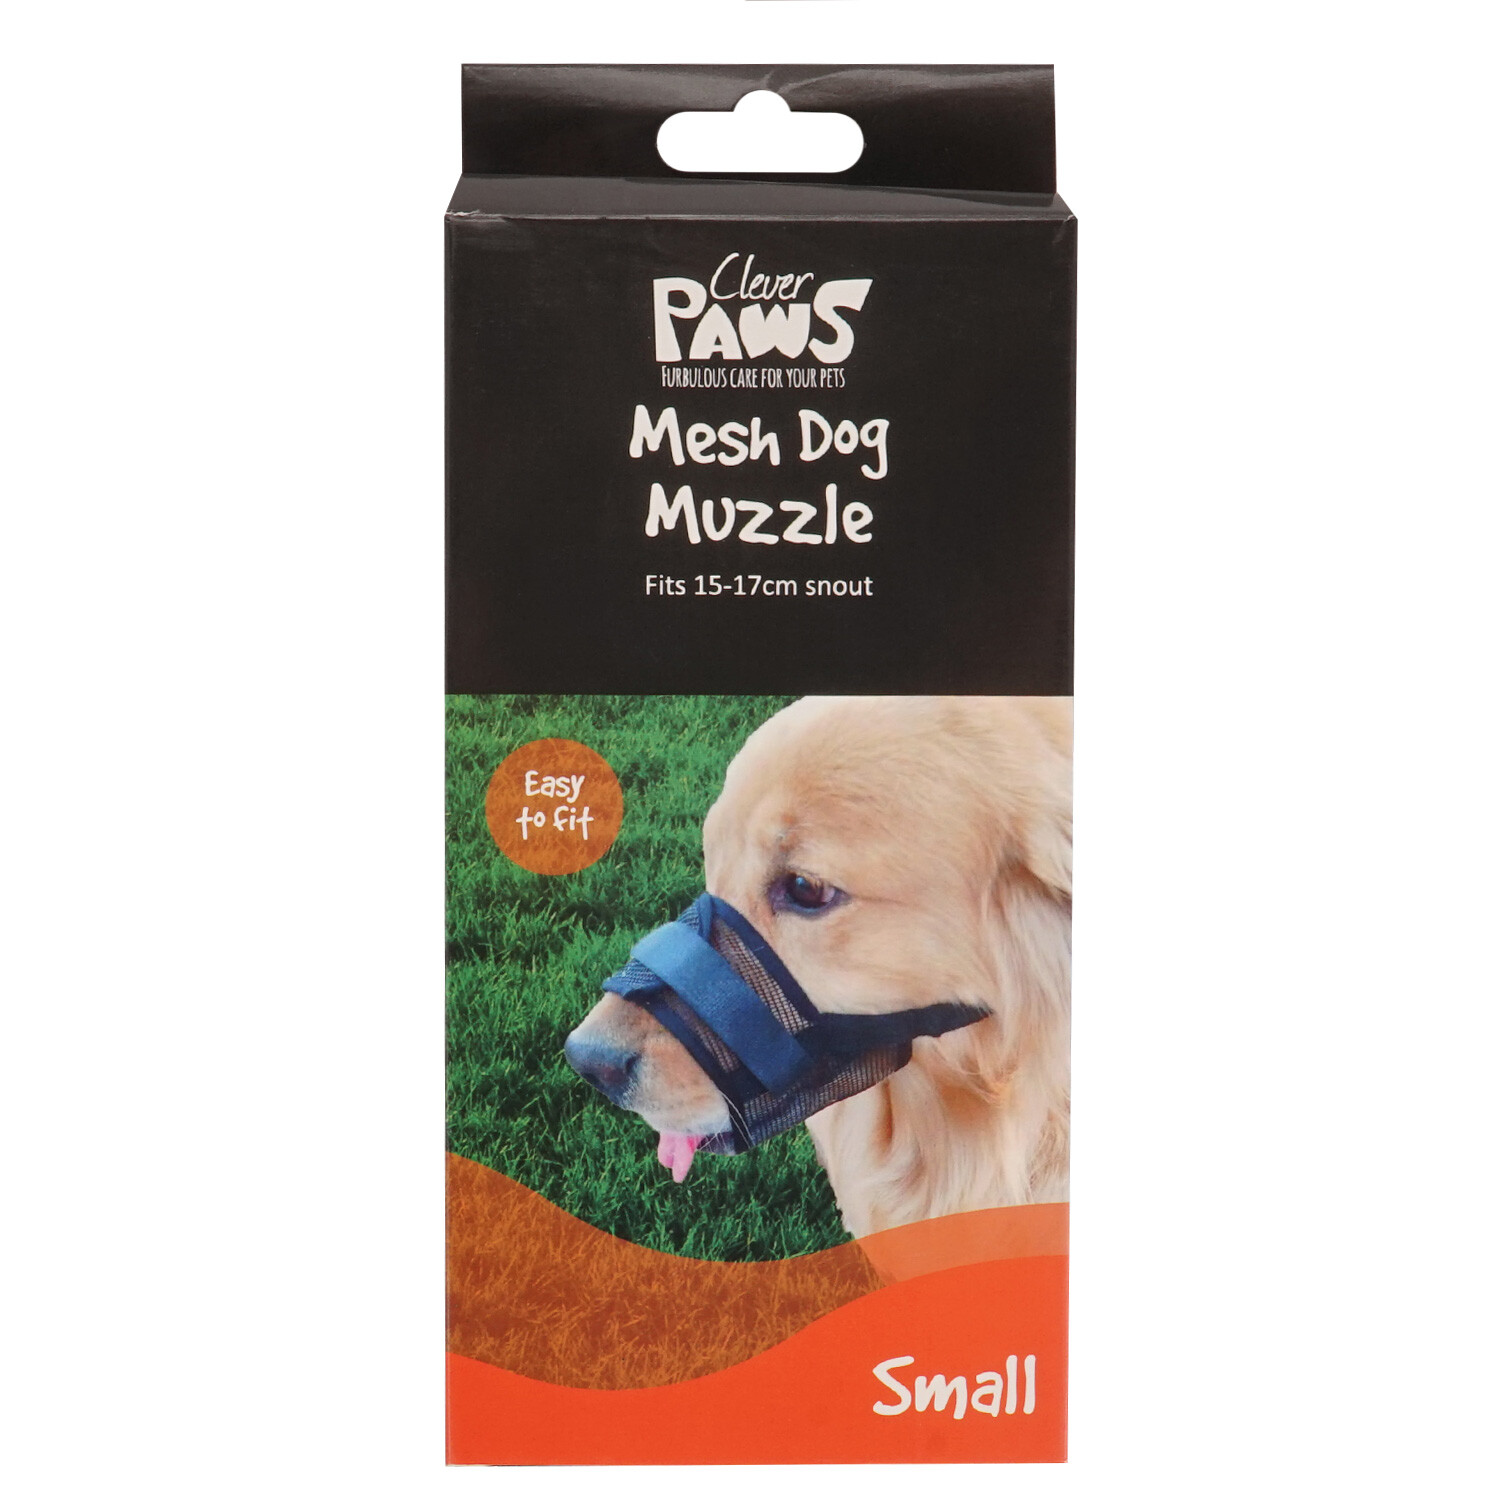 Clever Paws Mesh Dog Muzzle  - Black / Small Image 1